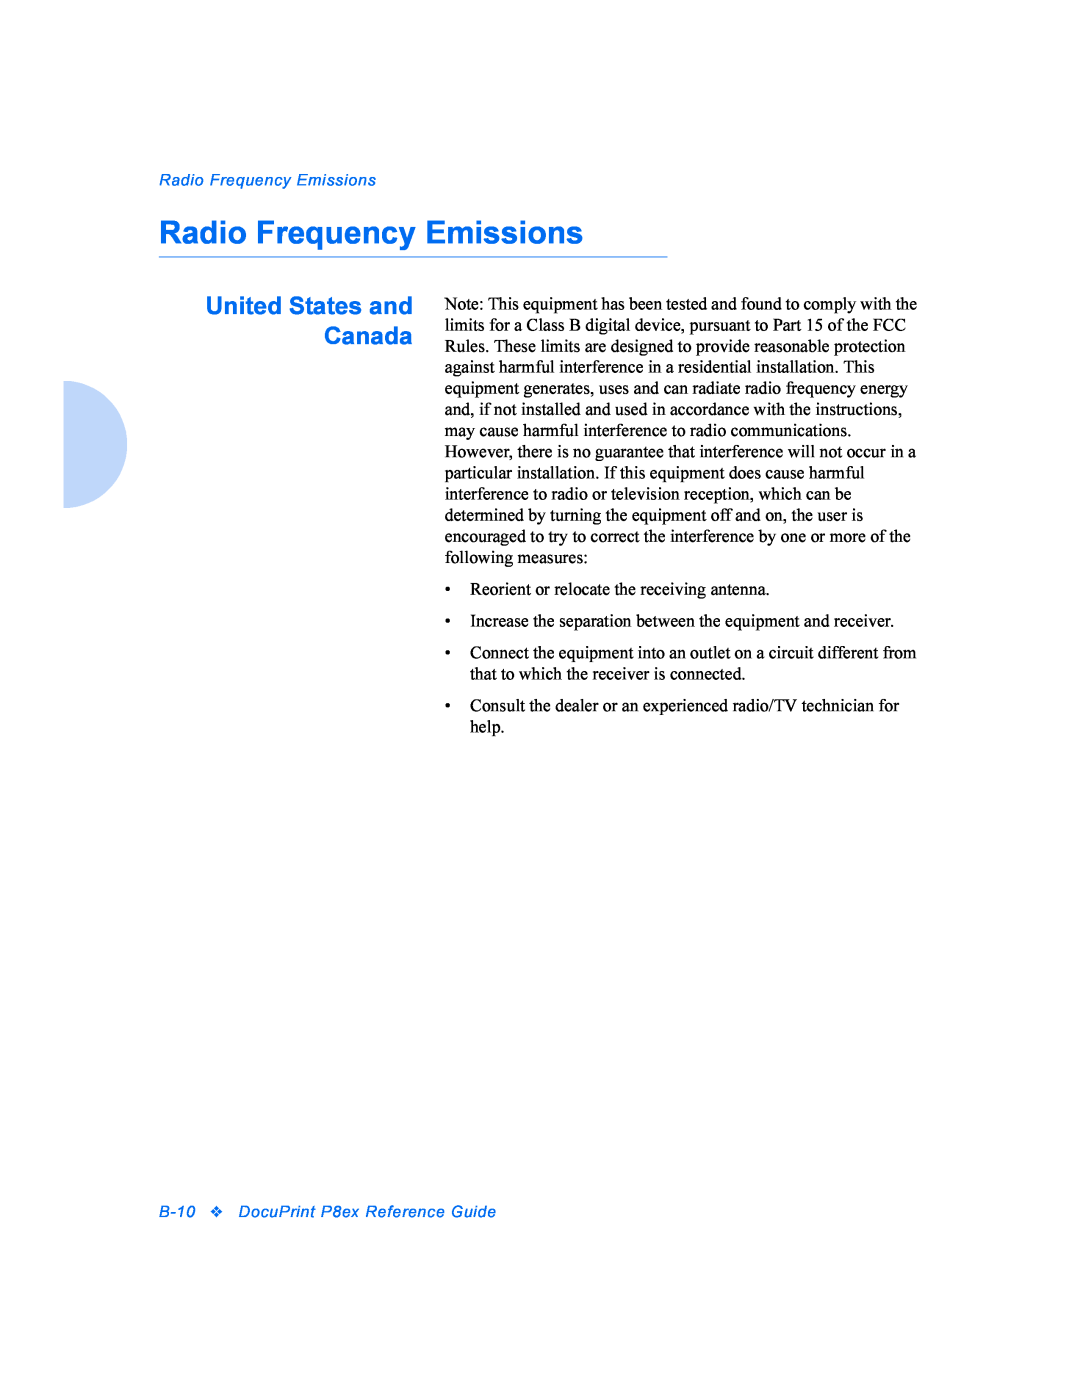 Xerox P8EX manual Radio Frequency Emissions, United States and Canada 